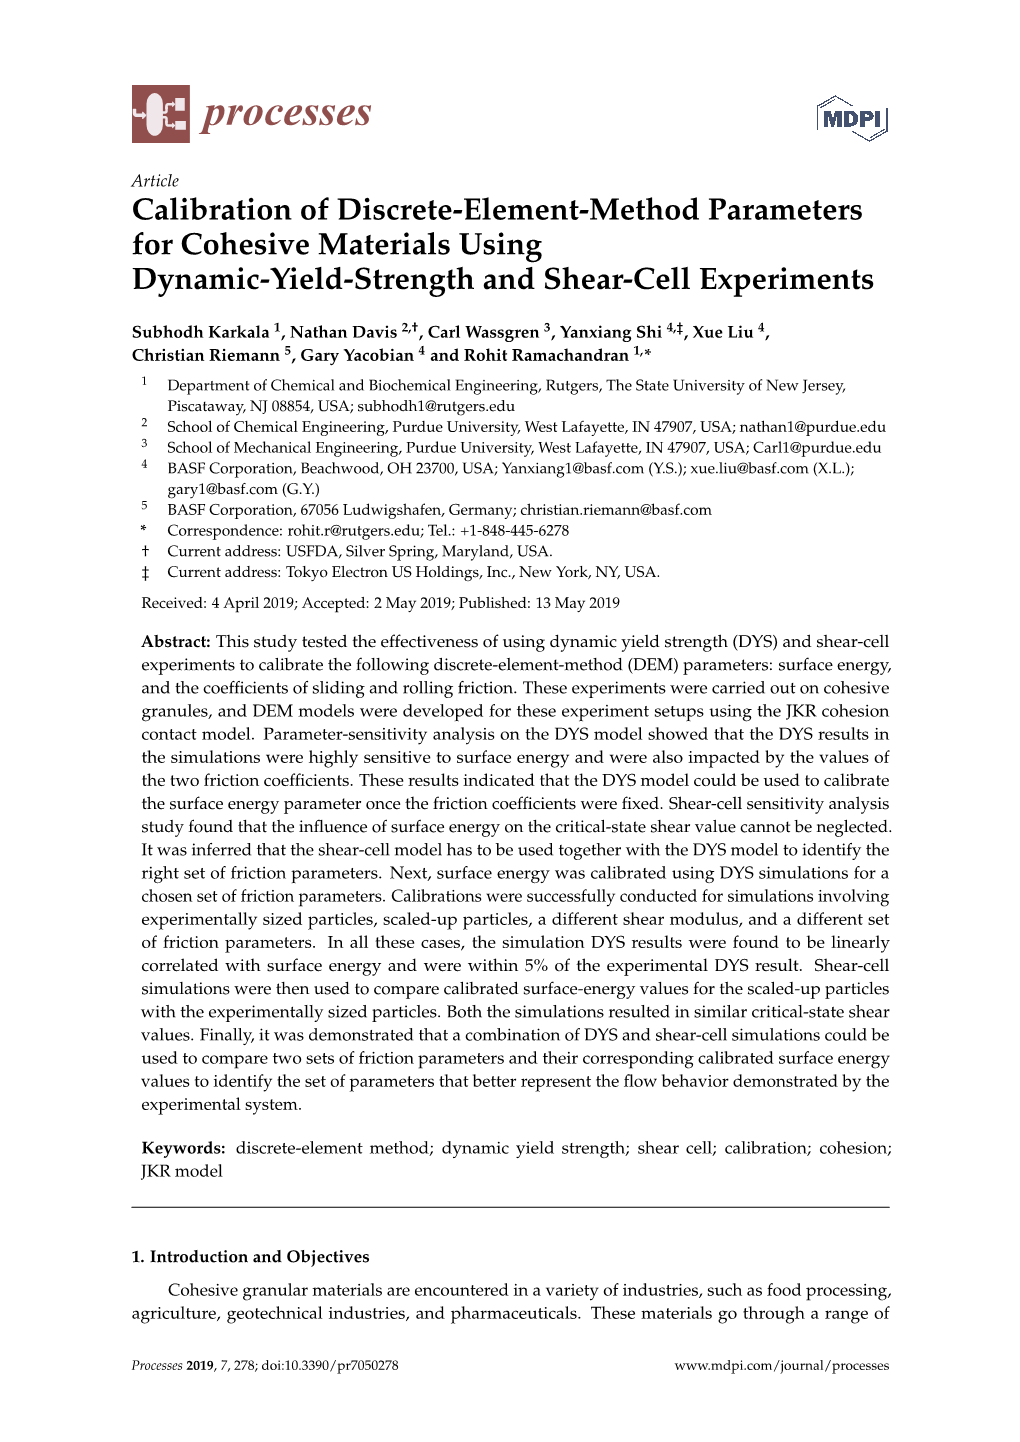 Calibration of Discrete-Element-Method Parameters for Cohesive Materials Using Dynamic-Yield-Strength and Shear-Cell Experiments